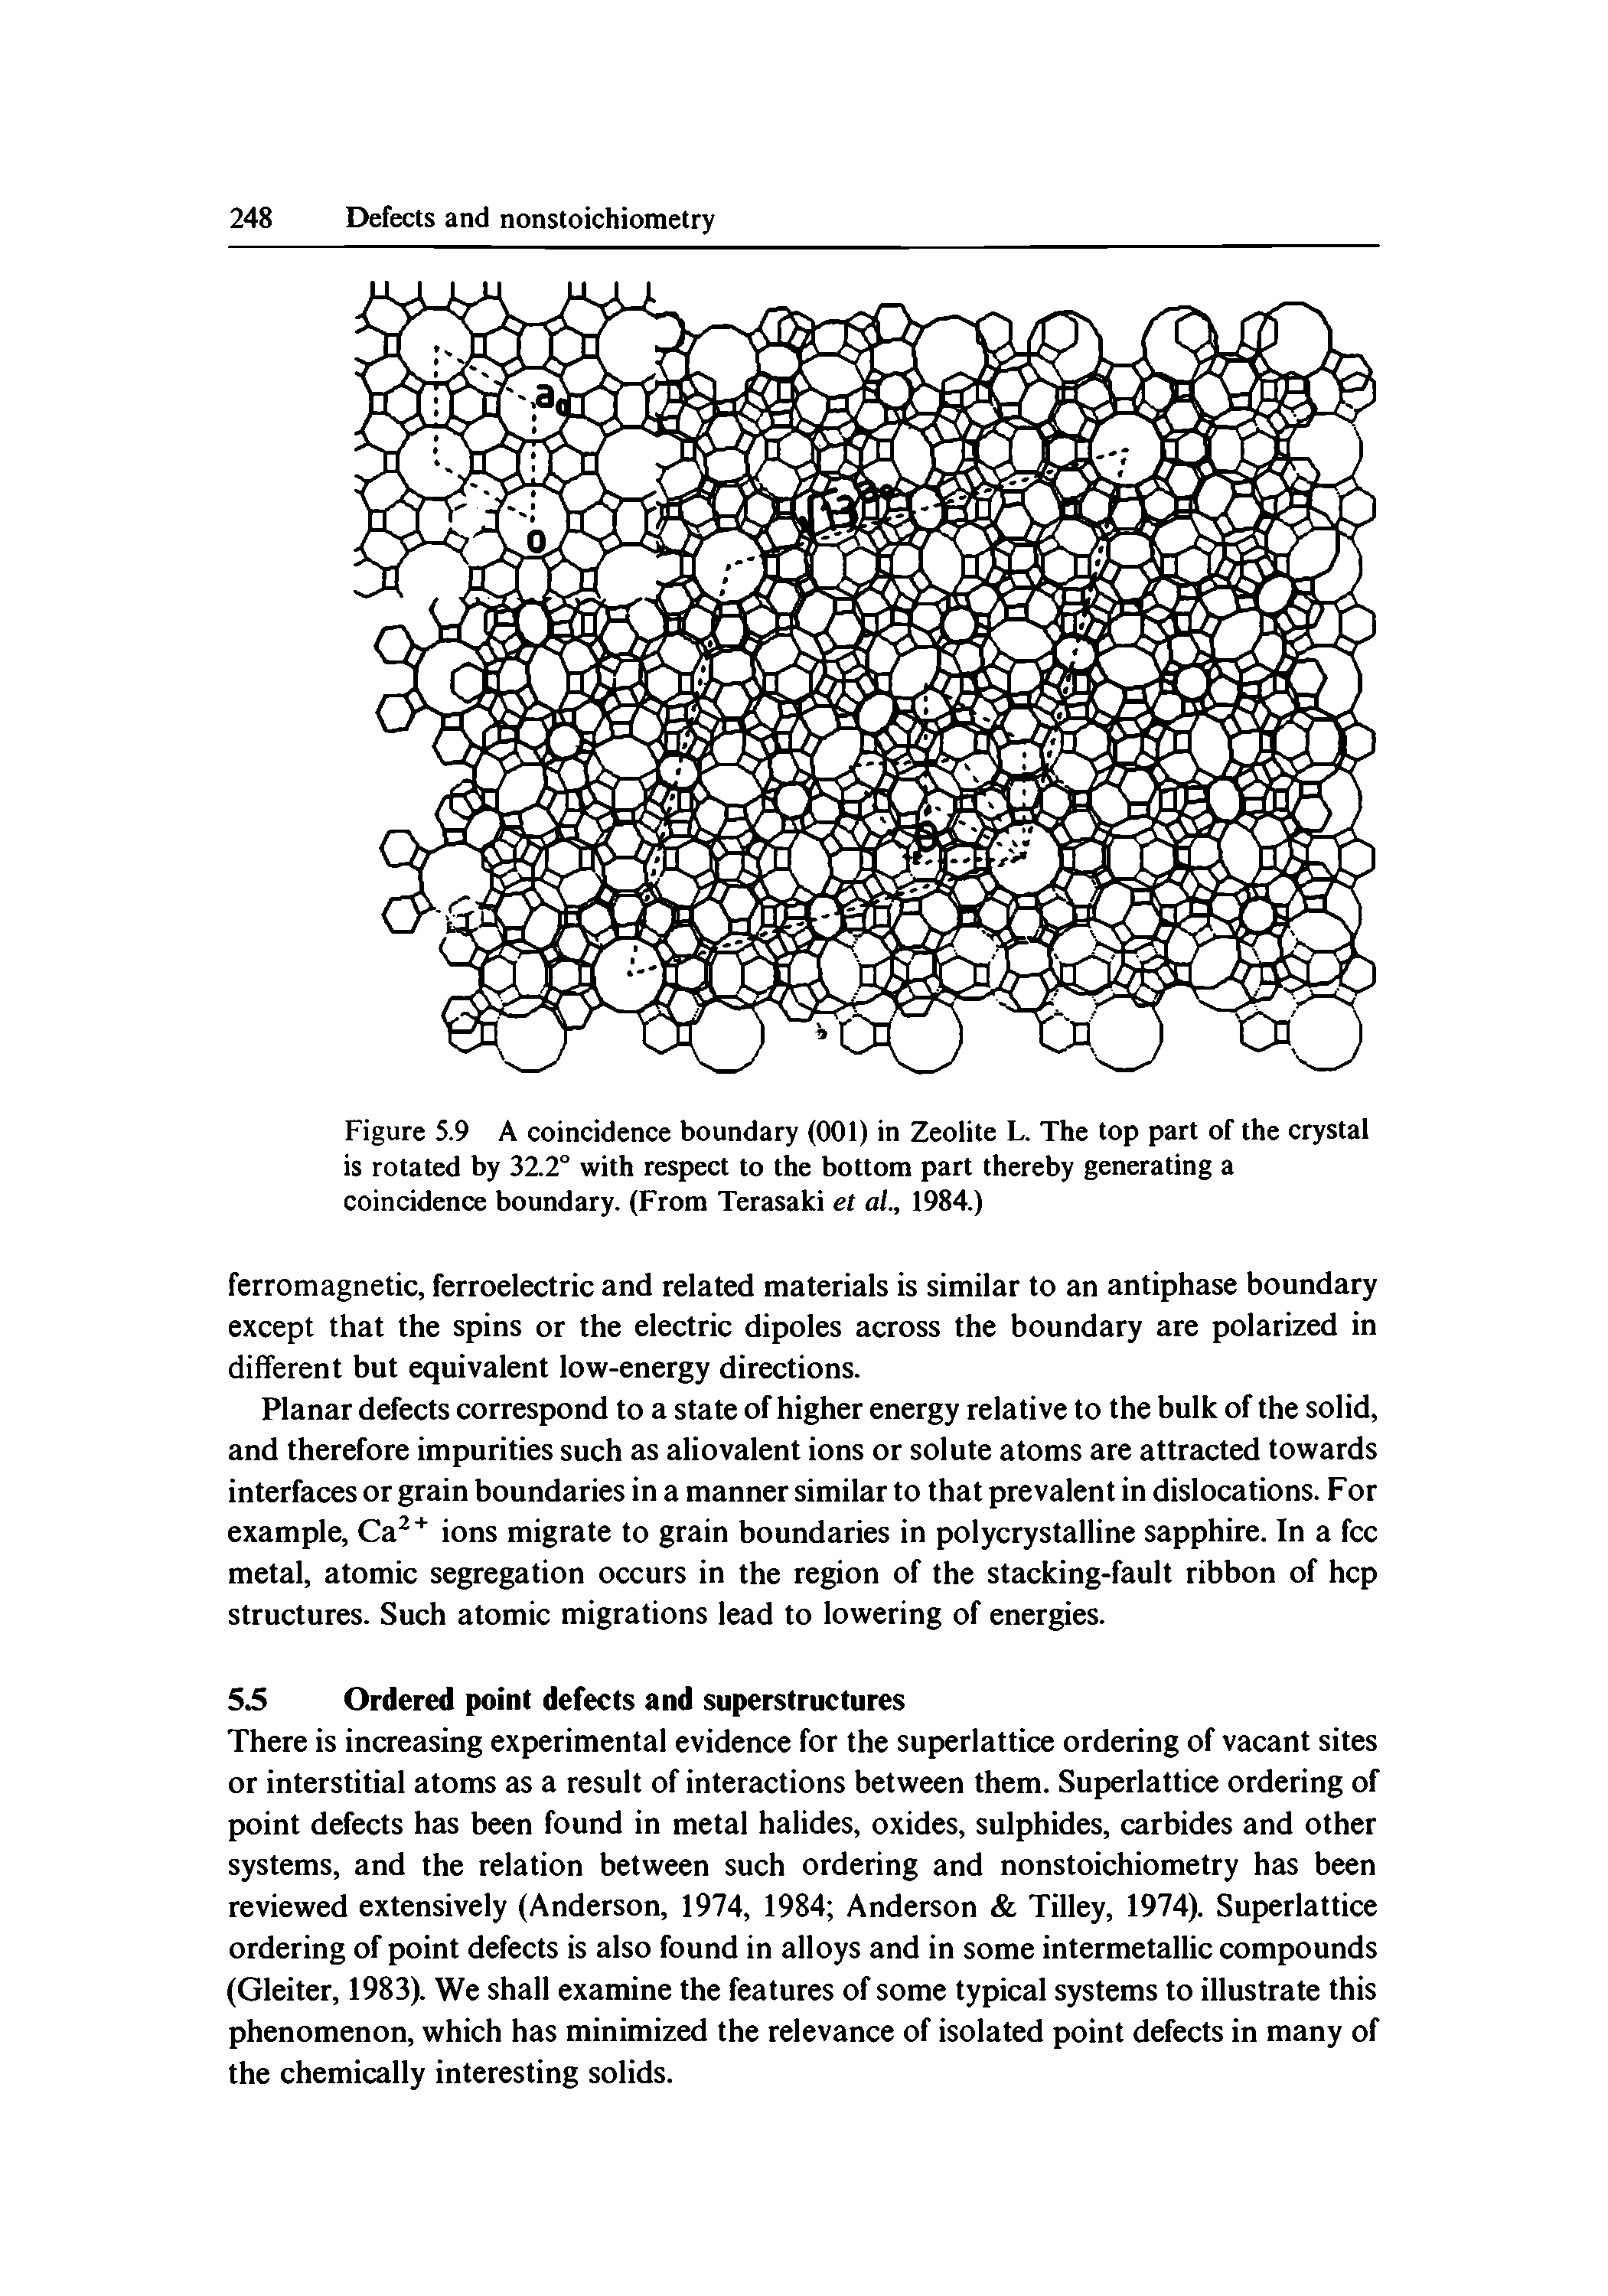 Figure 5.9 A coincidence boundary (001) in Zeolite L. The top part of the crystal is rotated by 32.2° with respect to the bottom part thereby generating a coincidence boundary. (From Terasaki et ai, 1984.)...